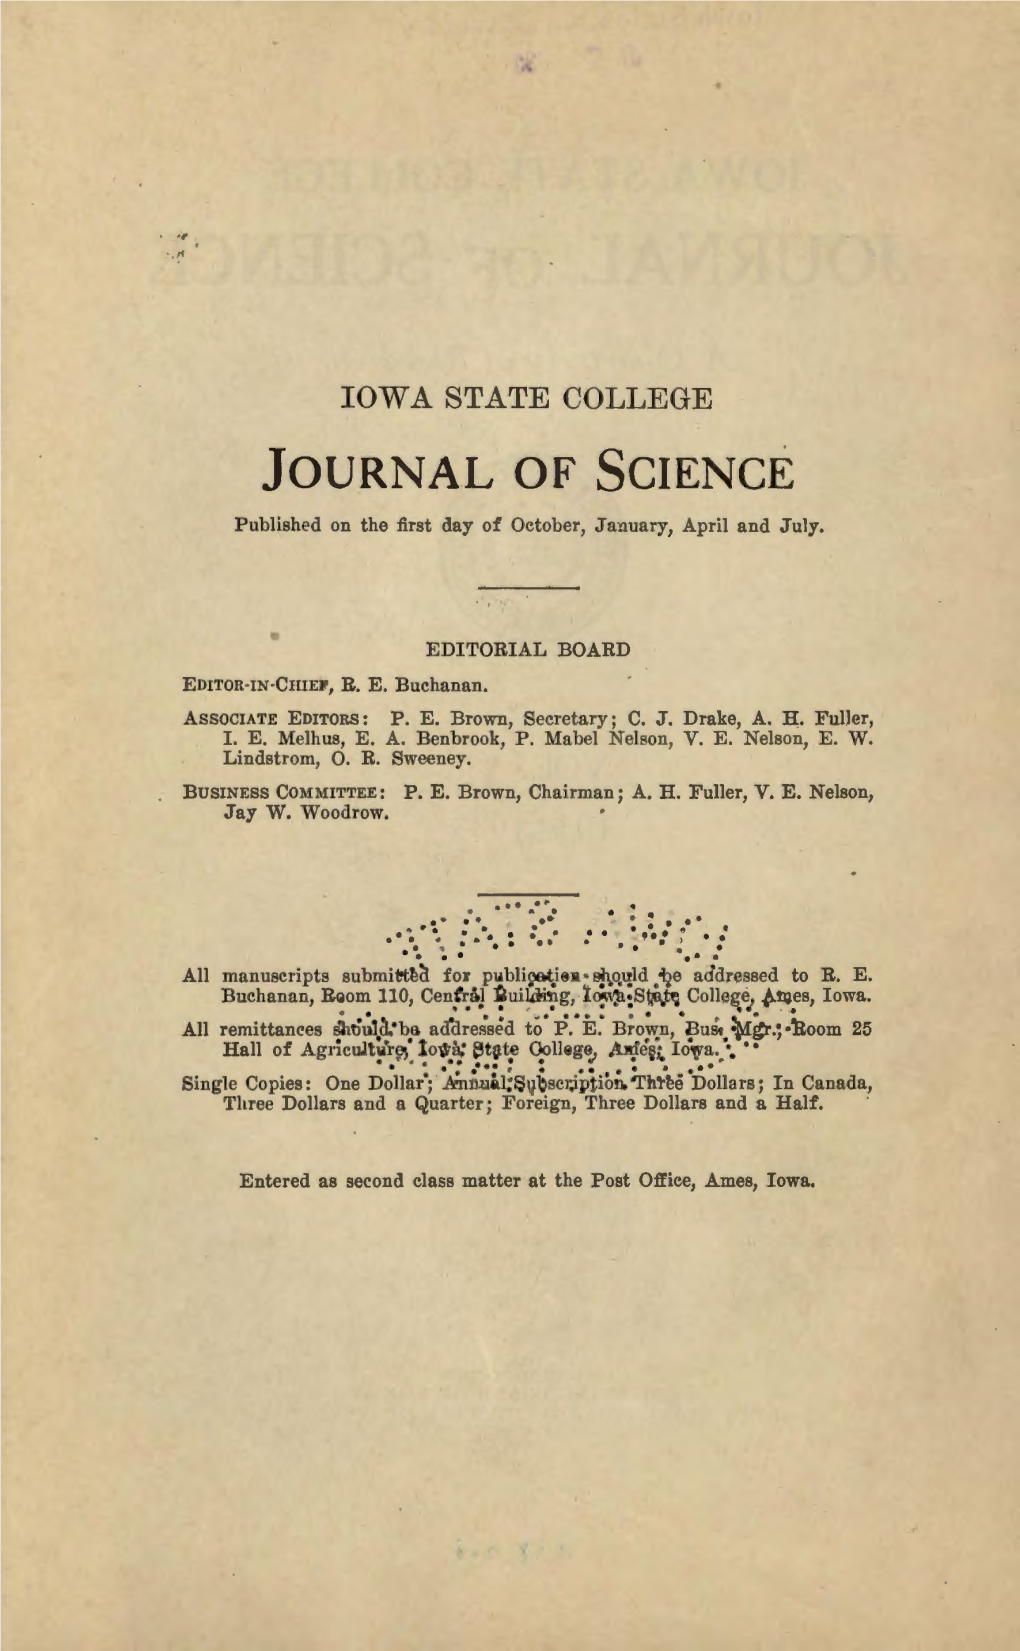 Iowa State College Journal of Science